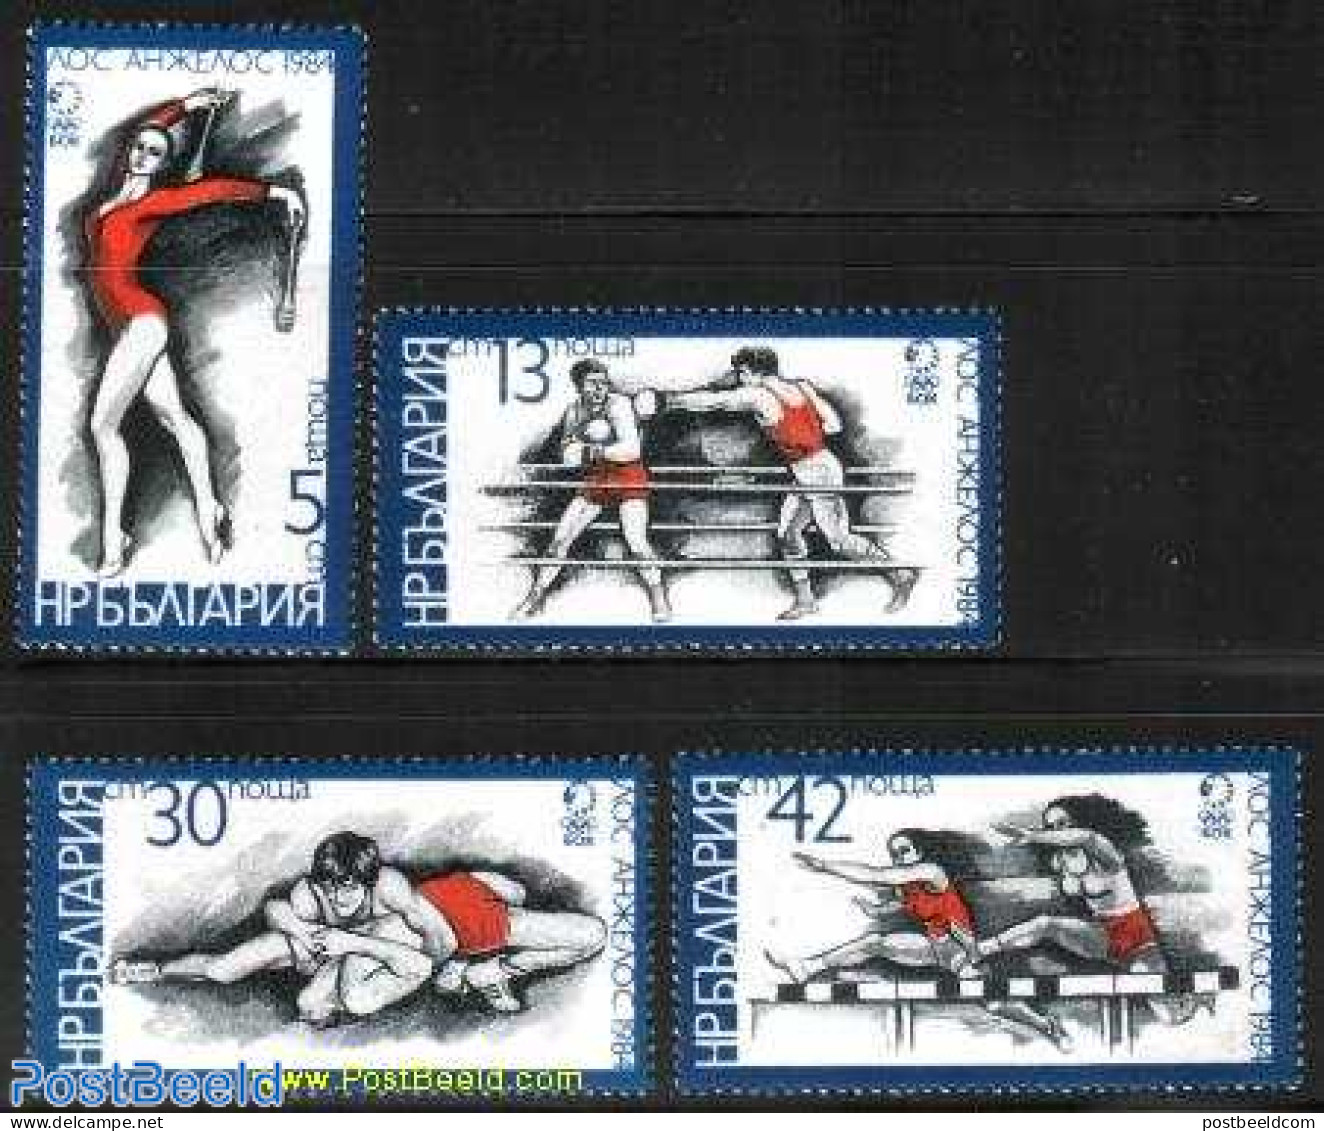 Bulgaria 1983 Olympic Games Los Angeles 4v, Mint NH, Sport - Athletics - Boxing - Gymnastics - Olympic Games - Unused Stamps